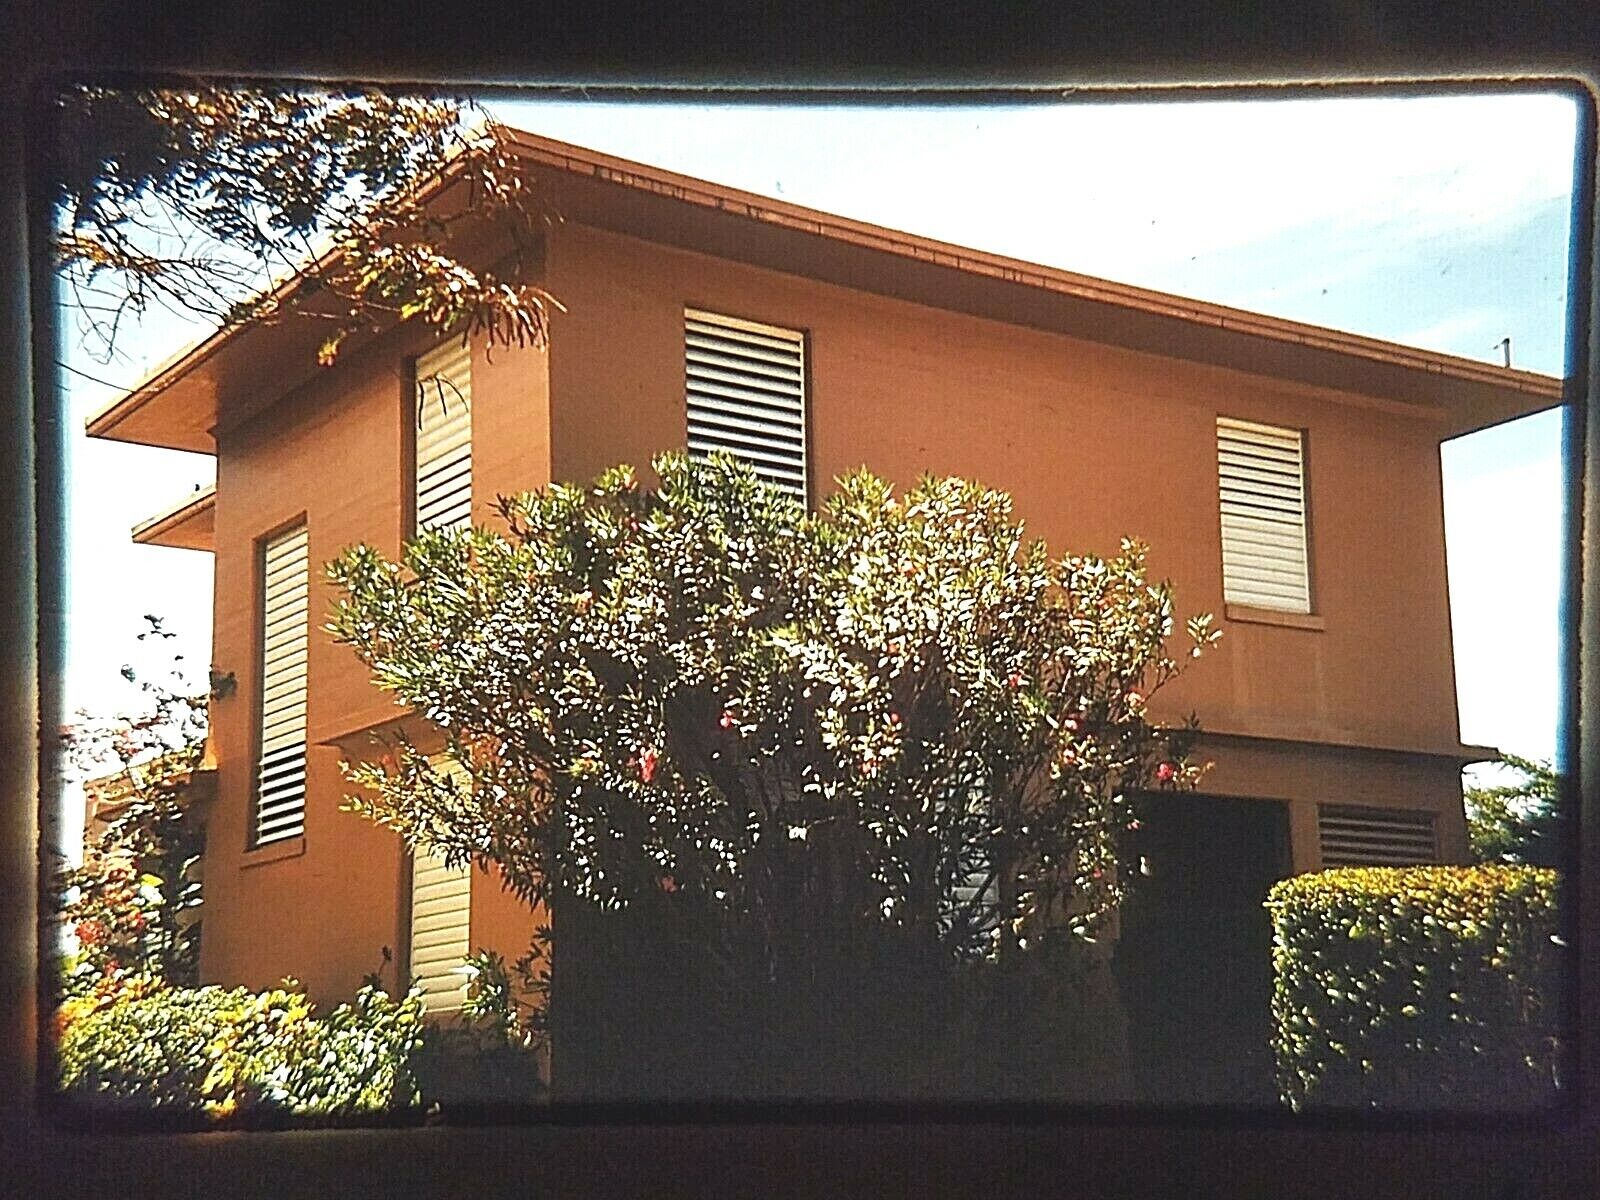 OH18 ORIGINAL KODACHROME 35MM SLIDE  ARCHITECTURE HOUSE STRUCTURE 